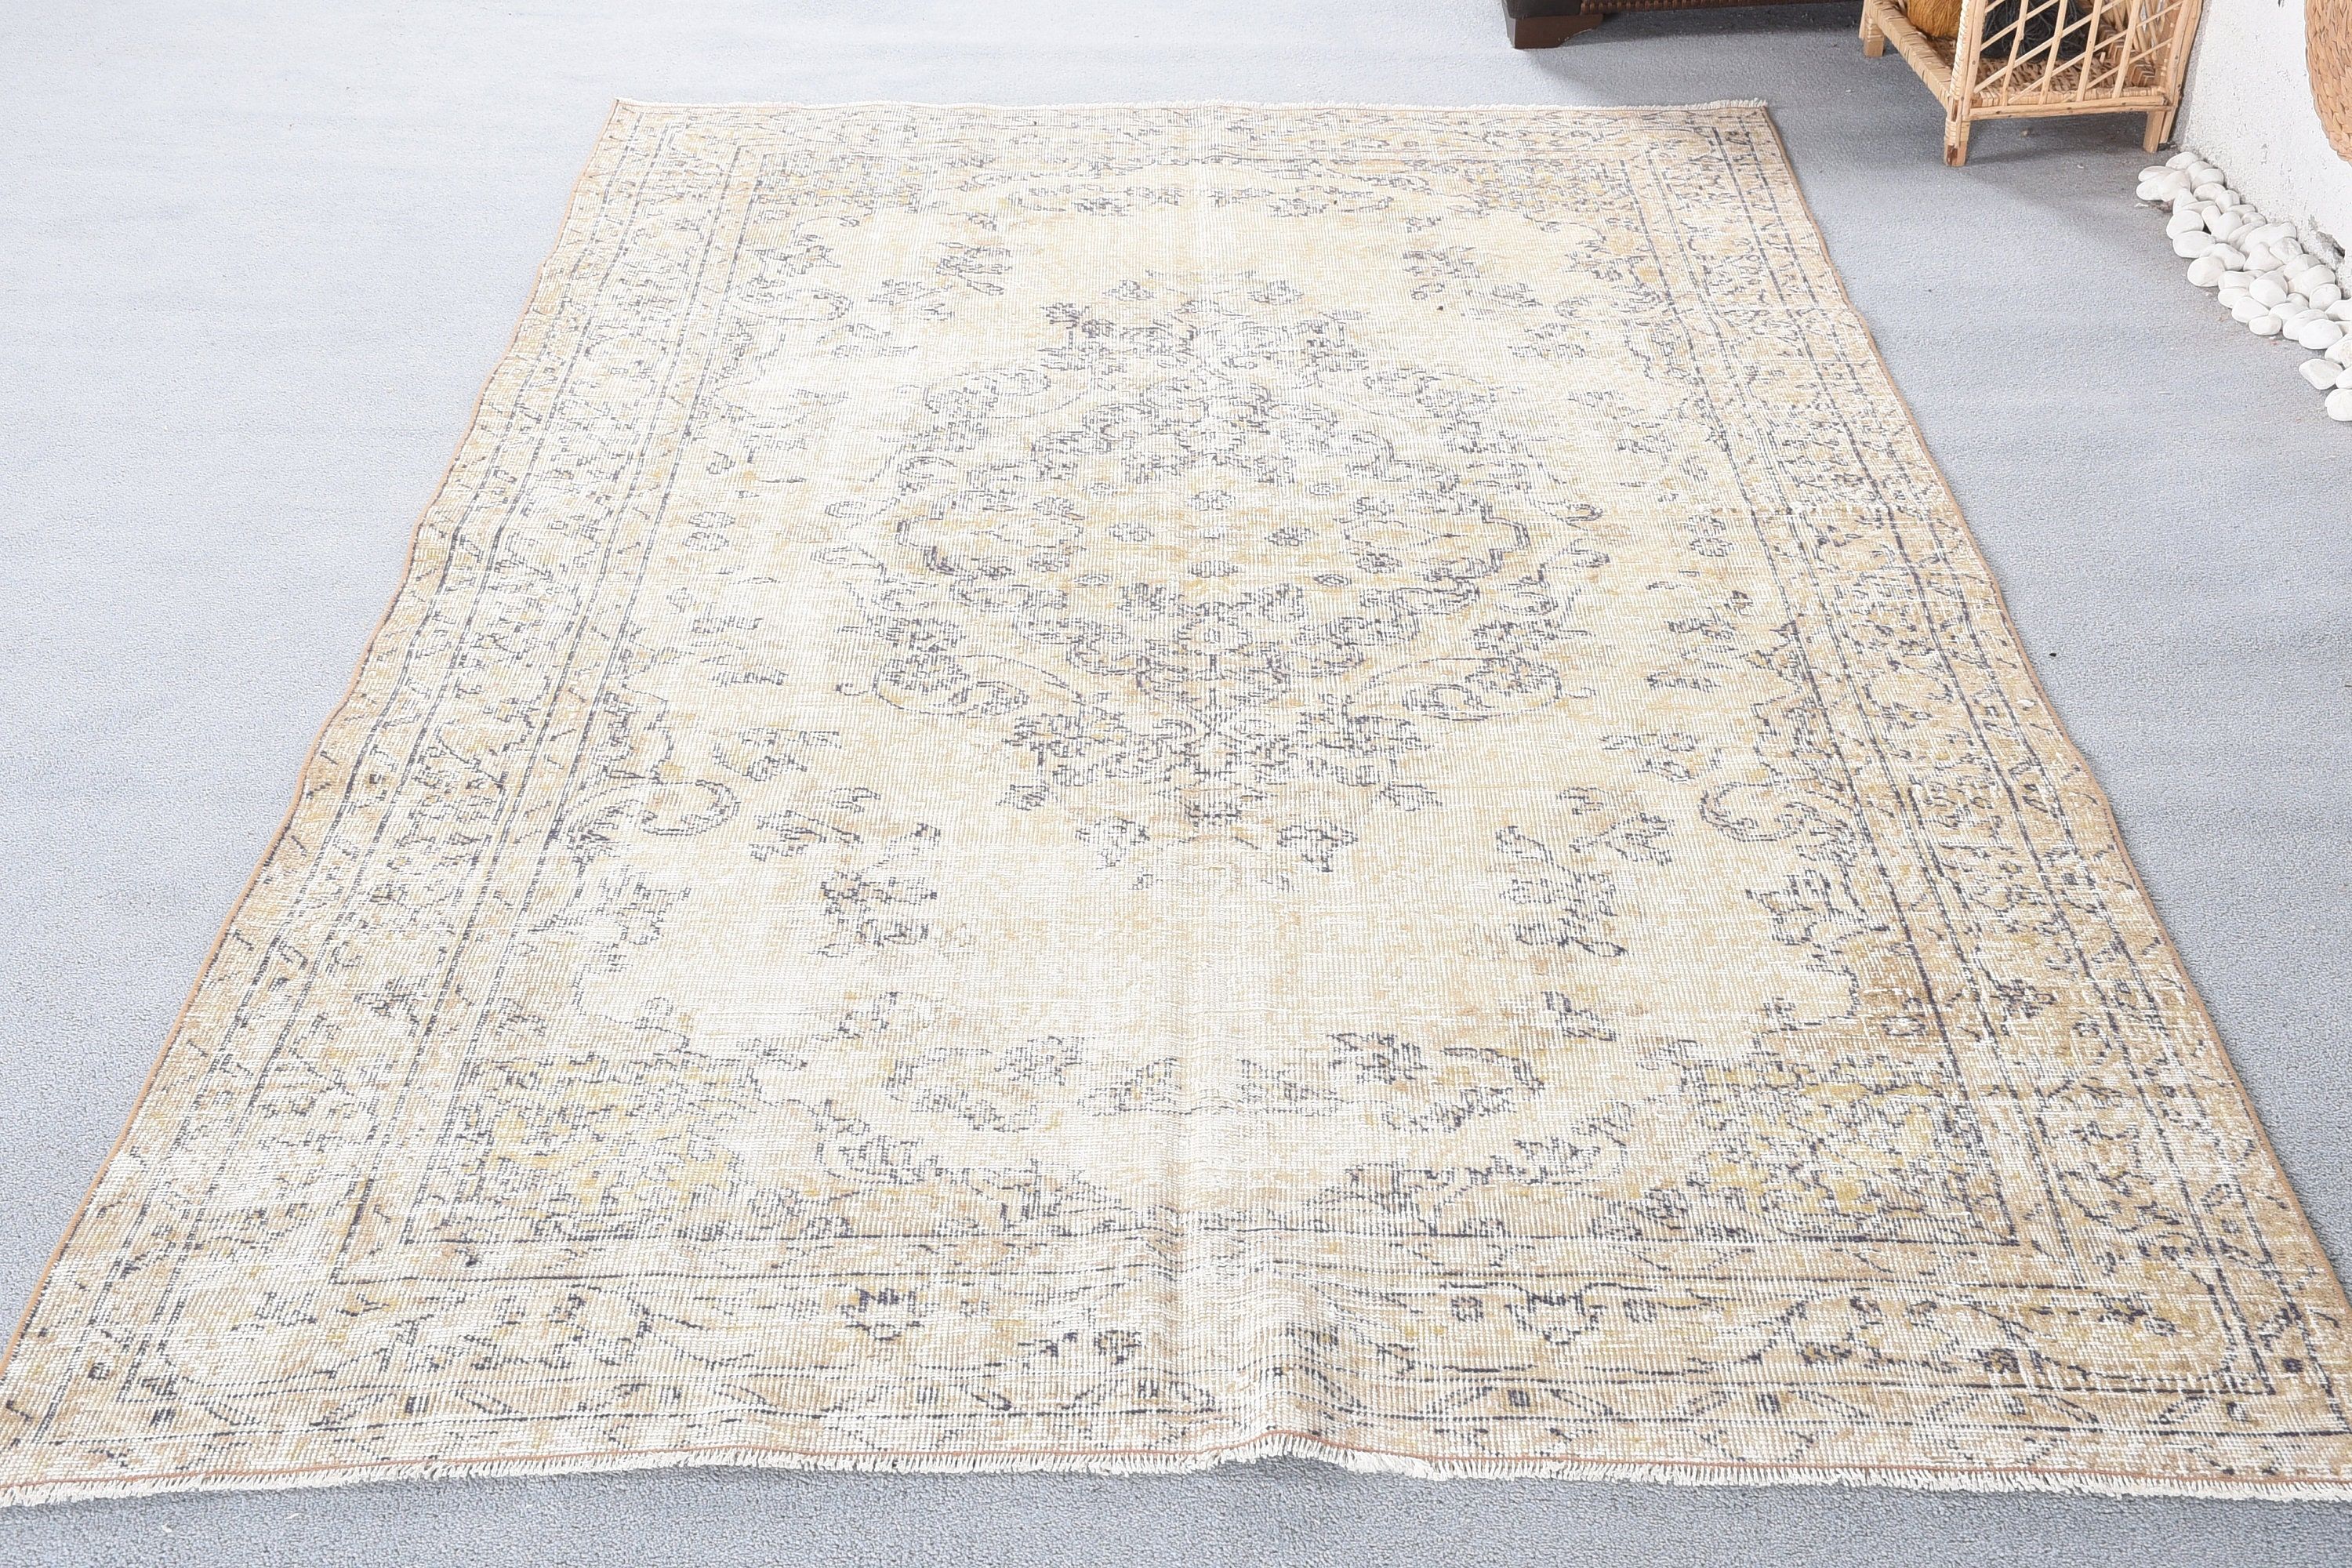 Kitchen Rugs, Rugs for Dining Room, Beige Bedroom Rug, 5.3x9.1 ft Large Rug, Vintage Rugs, Dining Room Rugs, Turkish Rug